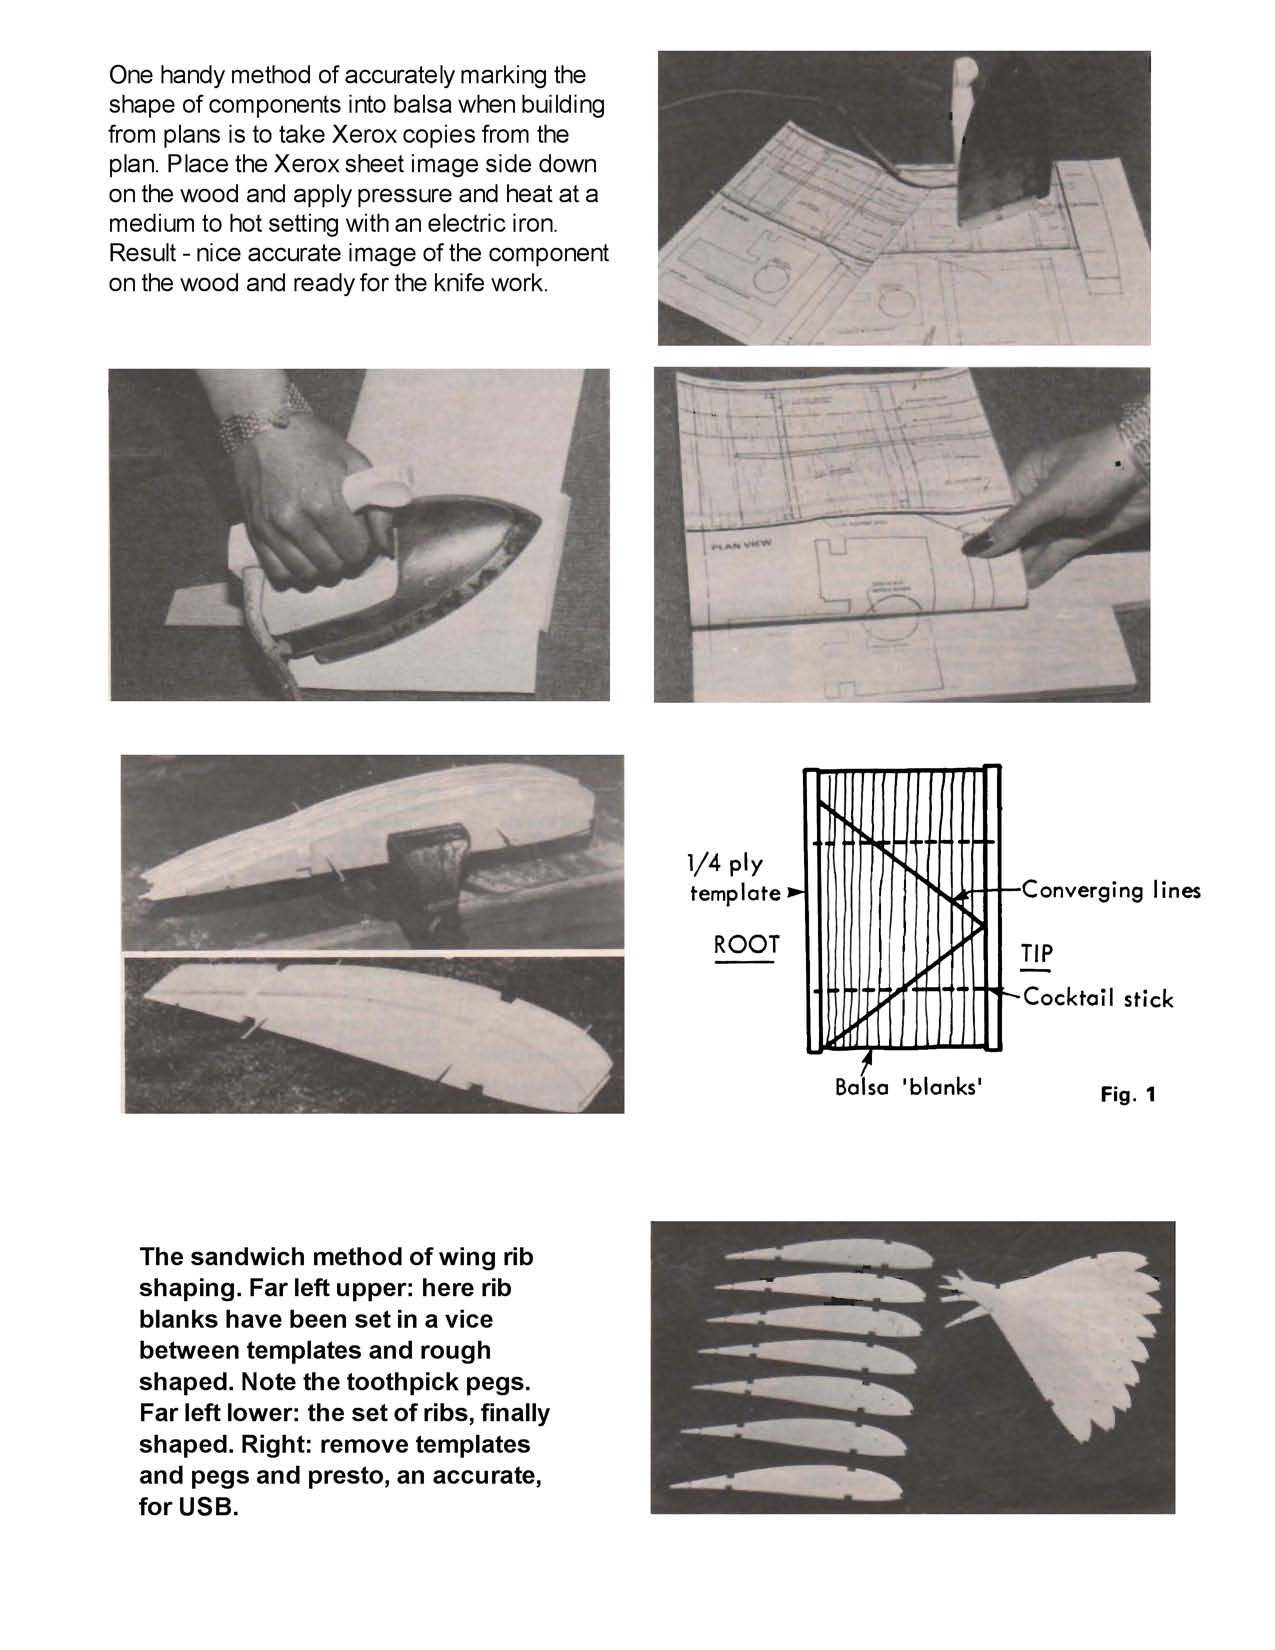 full size printed plans peanut scale "stinson reliant" five page article building from plans